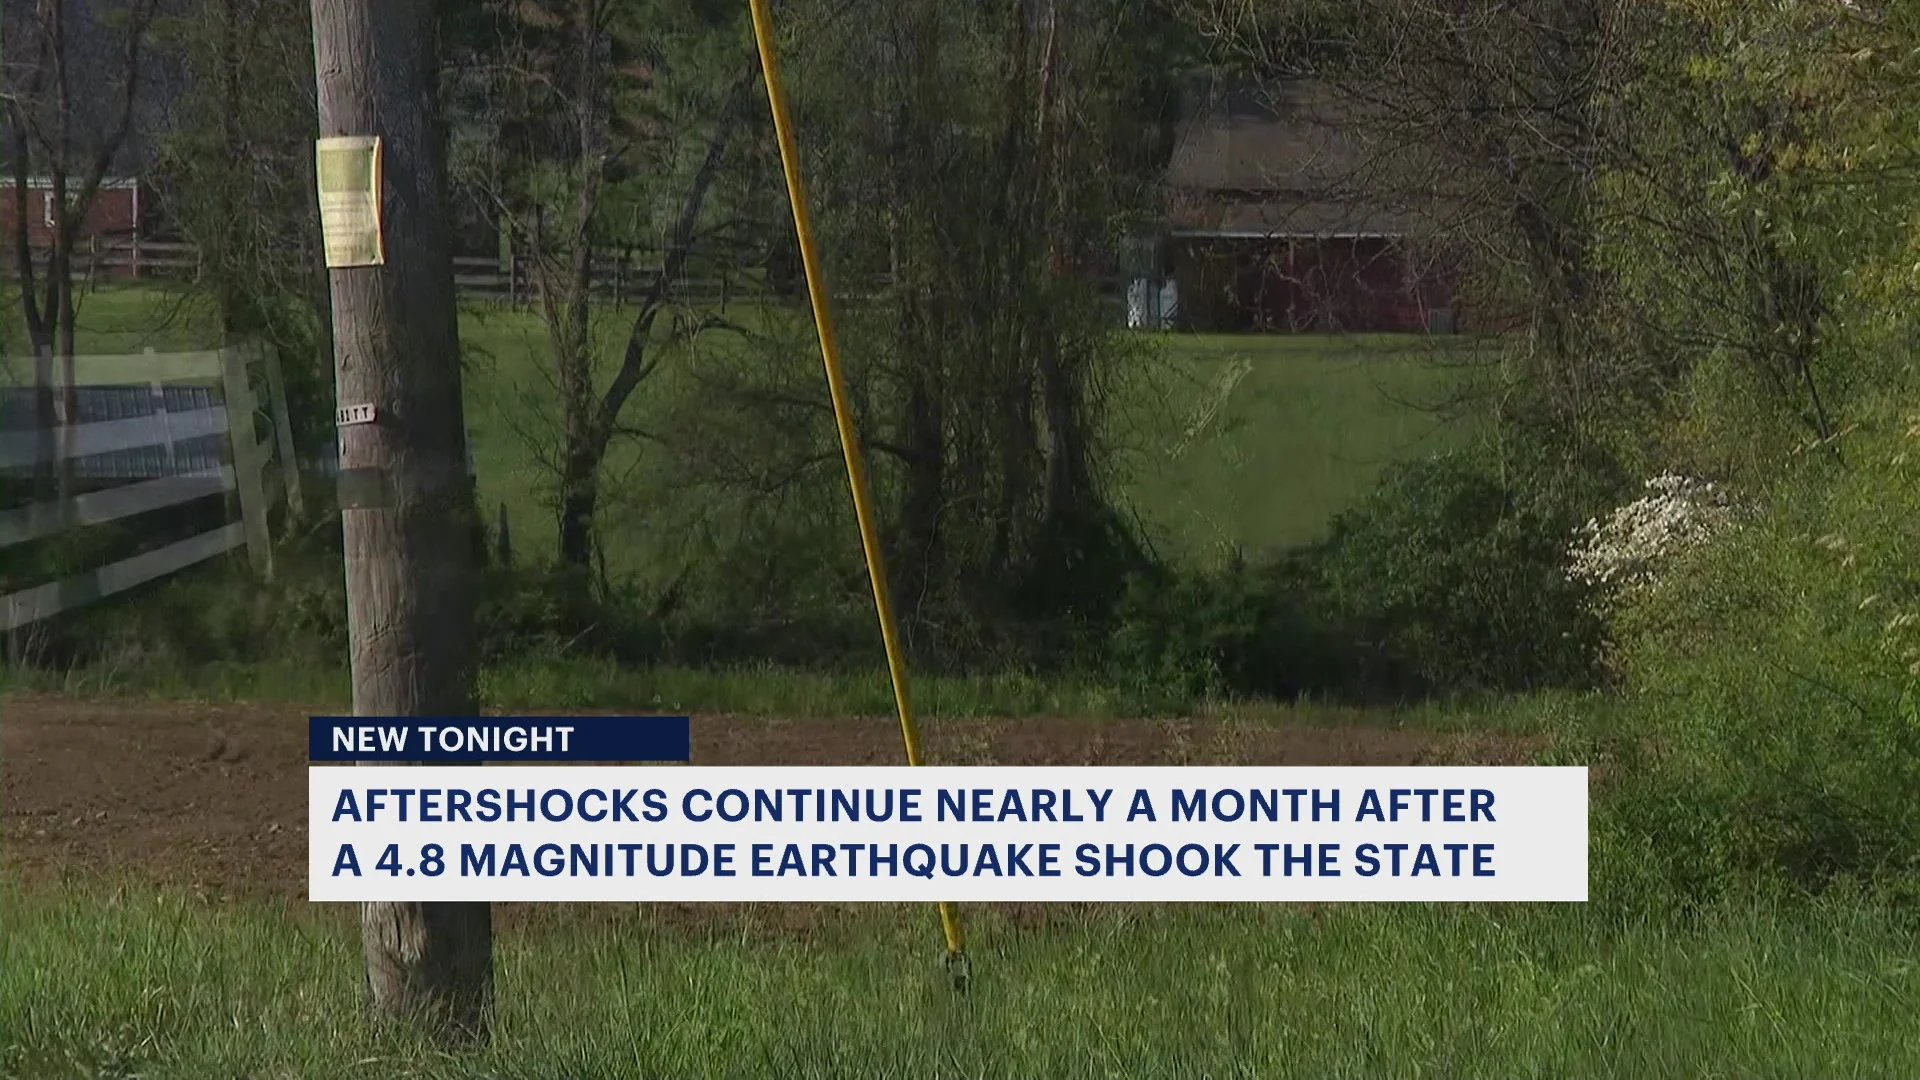 New Jersey sees more than 150 aftershocks since April 5 4.8 magnitude earthquake